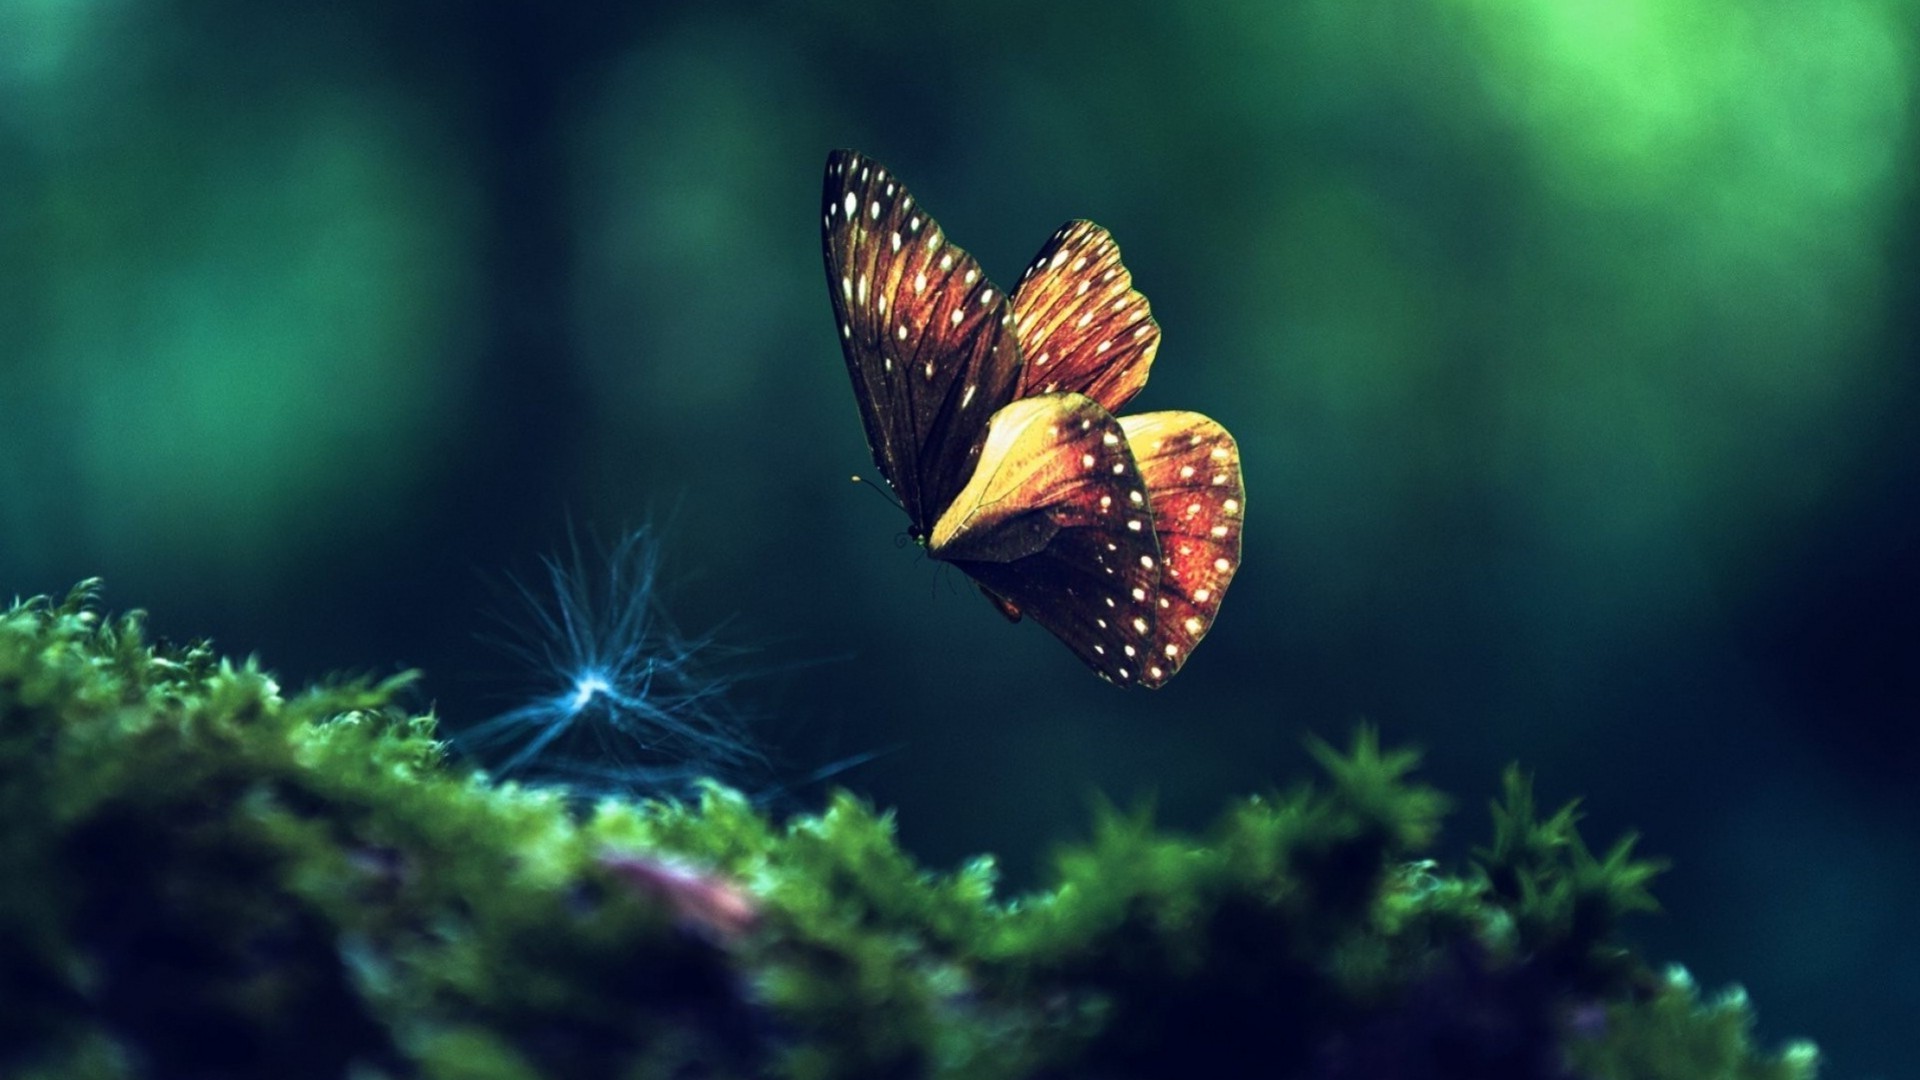 nature photo wallpaper,nature,butterfly,macro photography,green,organism